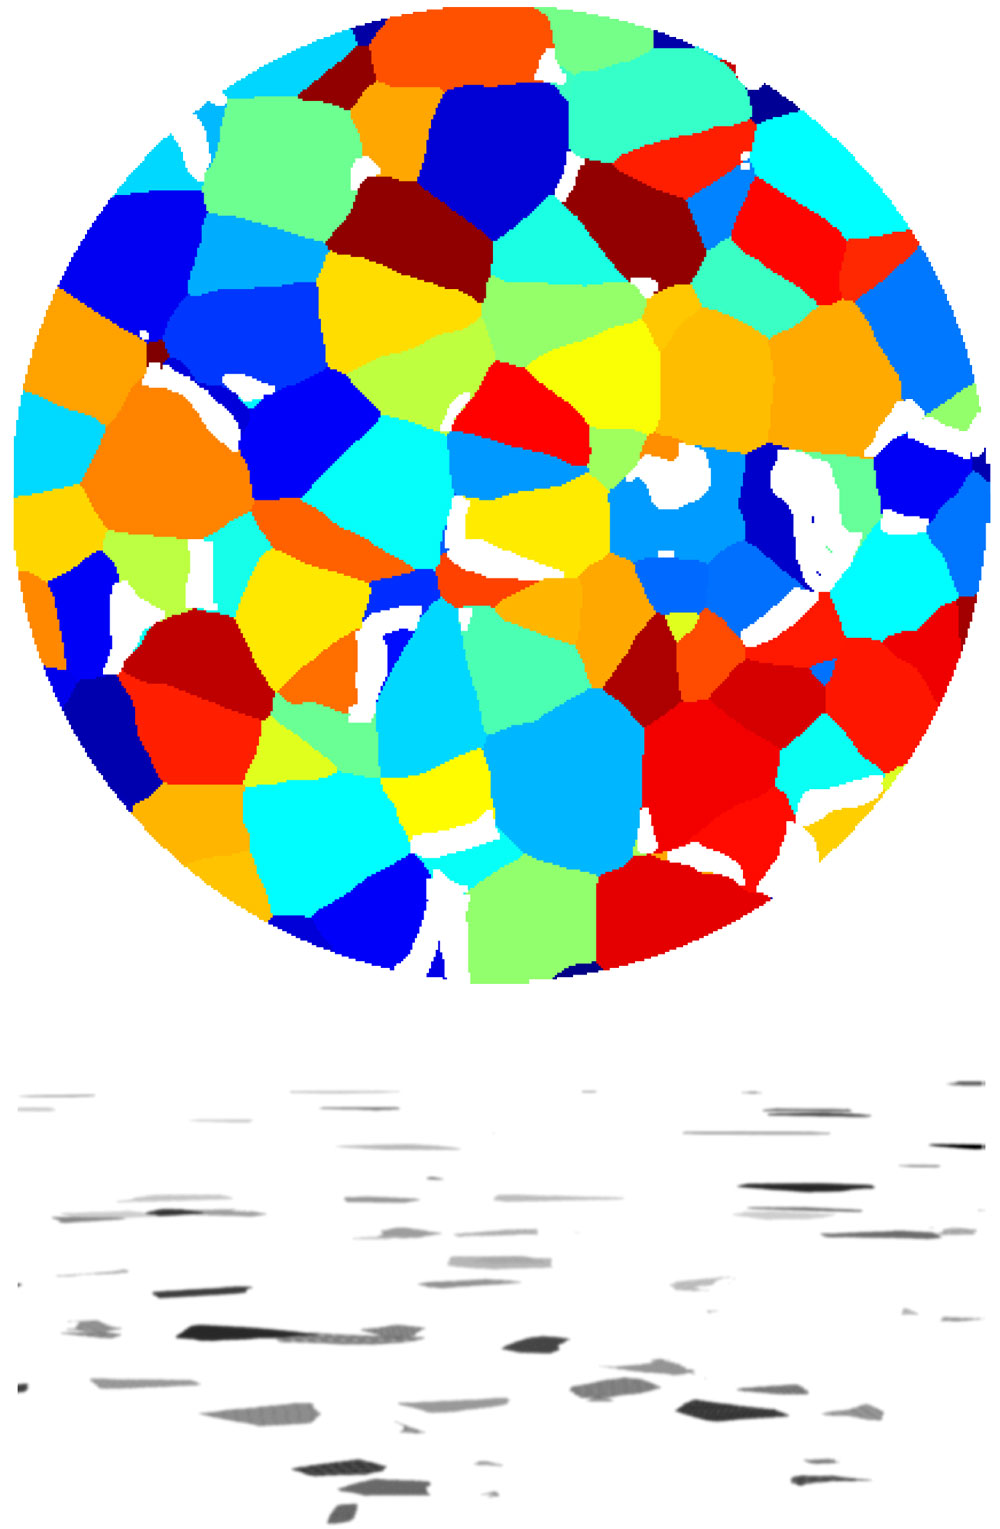 (top) A two-dimensional (2D) rendering is based on a reconstructed 1.2-millimeter-diameter slice of HEDM data. Colors represent single grains separated by GBs. Areas in white represent cracks. (bottom) This single x-ray diffraction pattern from an HEDM measurement was the basis for the 2D rendering. Individual diffraction spots capture individual grain shapes. 